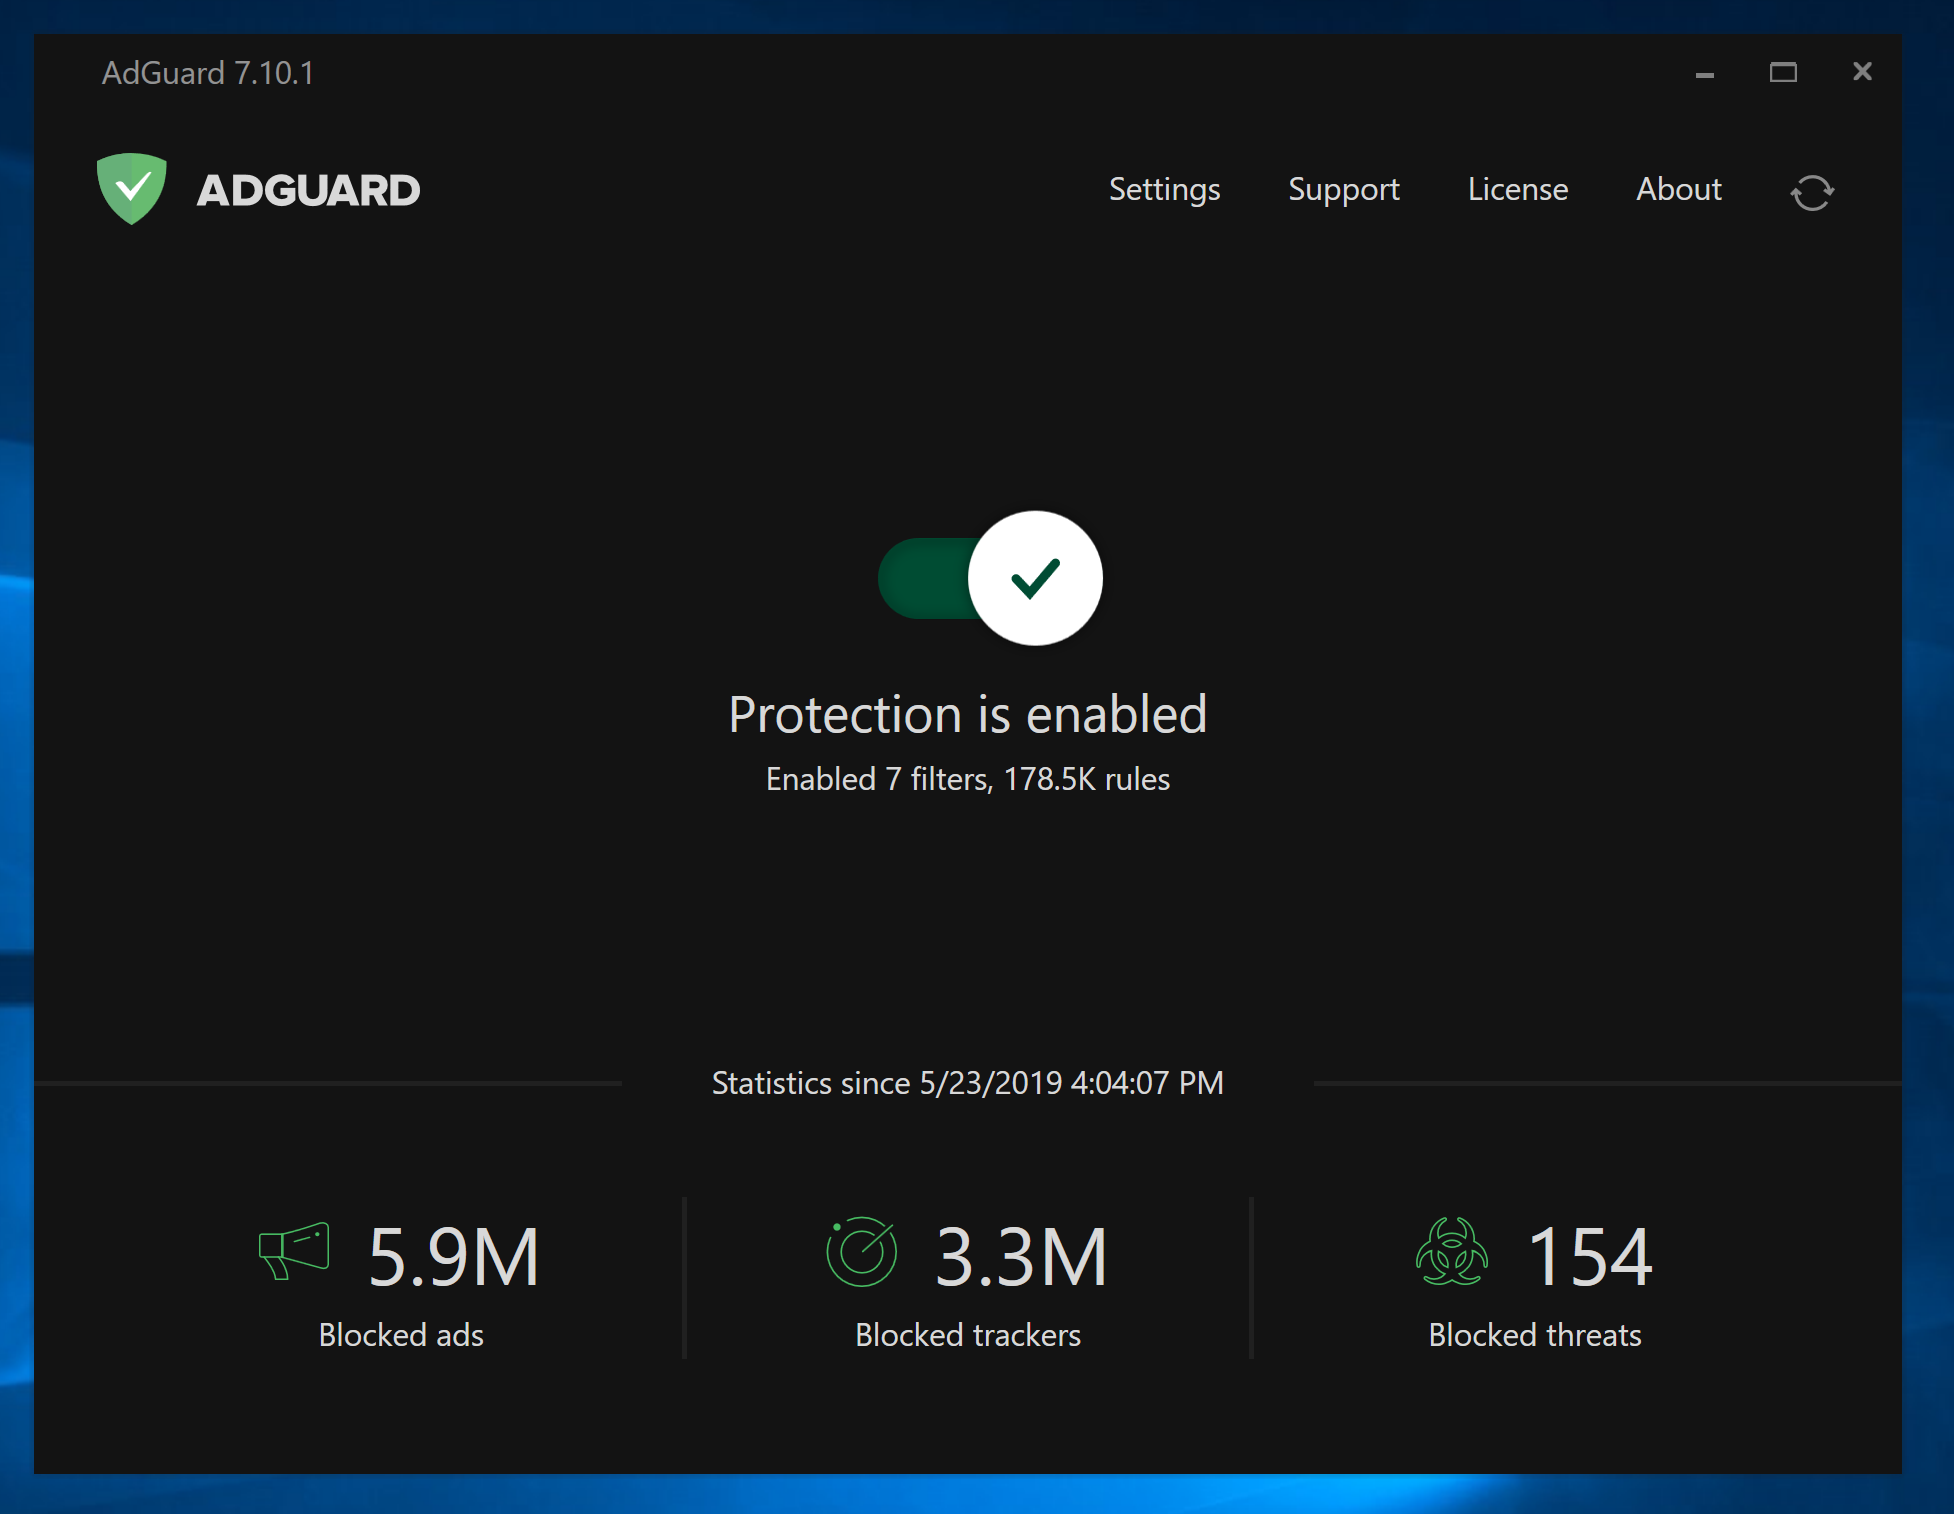 AdGuard protects users from ads and trackers in Internet Explorer as well